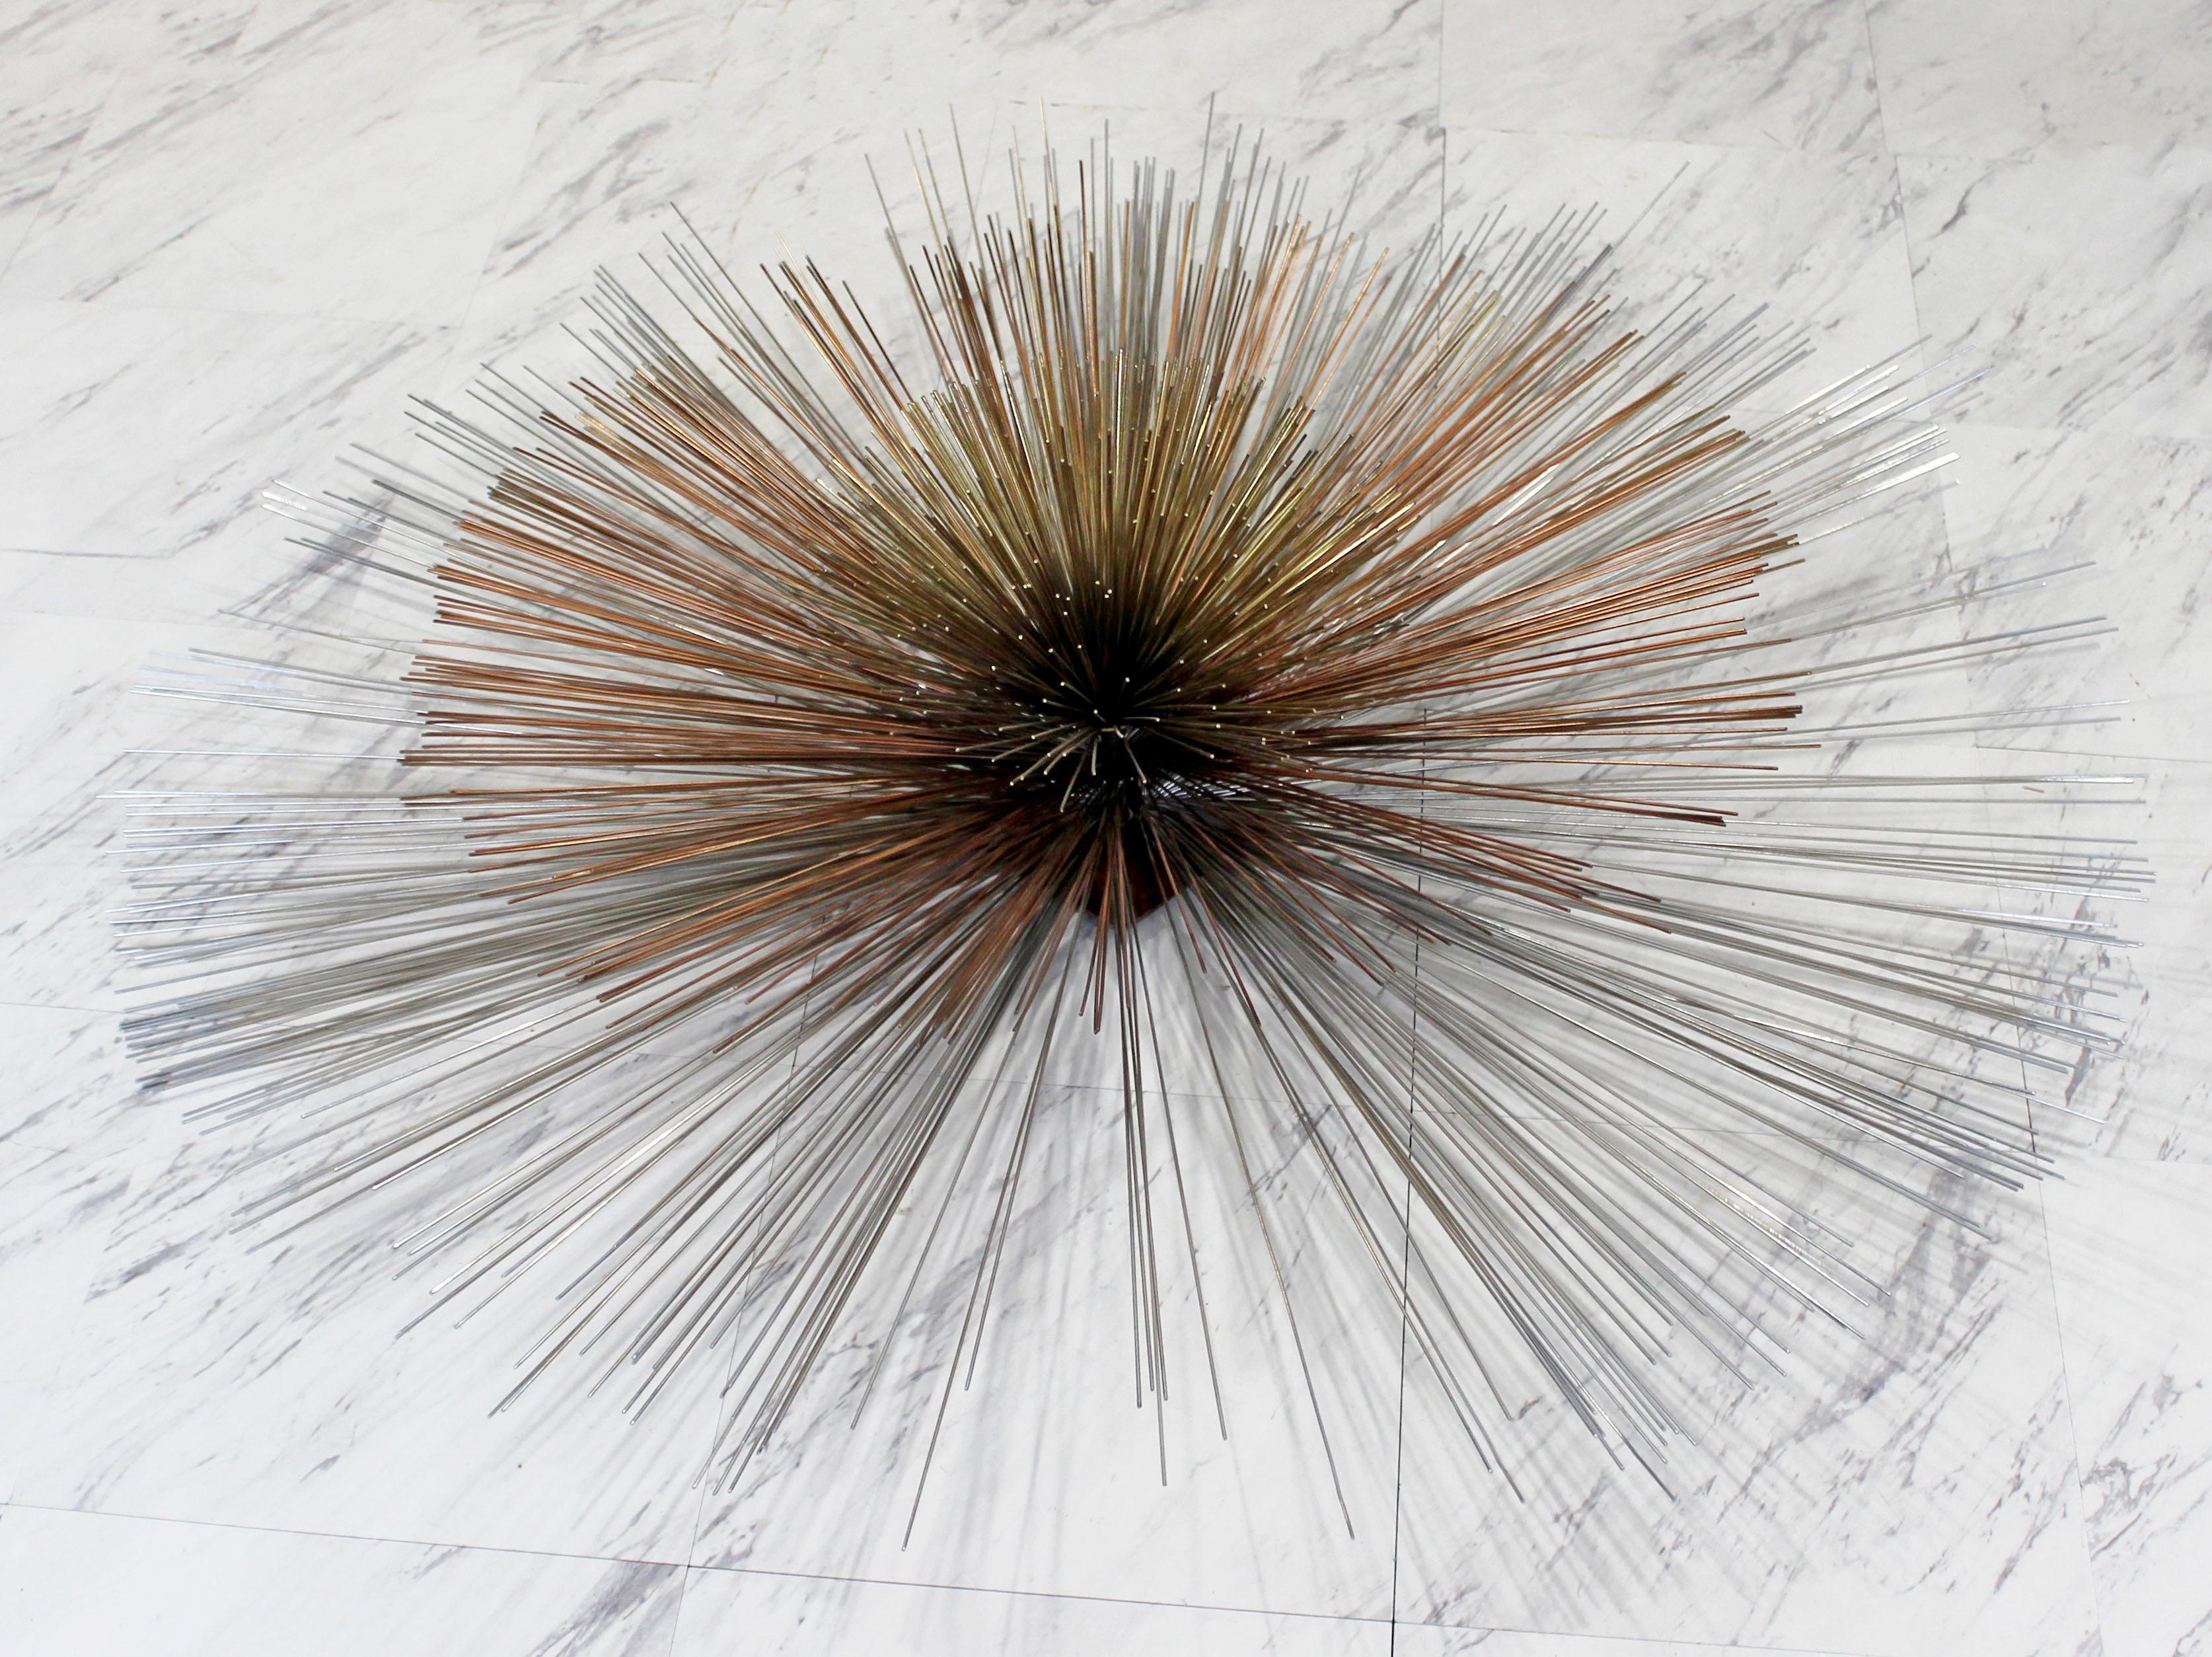 For your consideration is a beautiful, large wall Curtis Jere sculpture, reminiscent of a starburst or sunburst, made of copper and metal, circa the 1970s. In excellent condition. The dimensions are 40